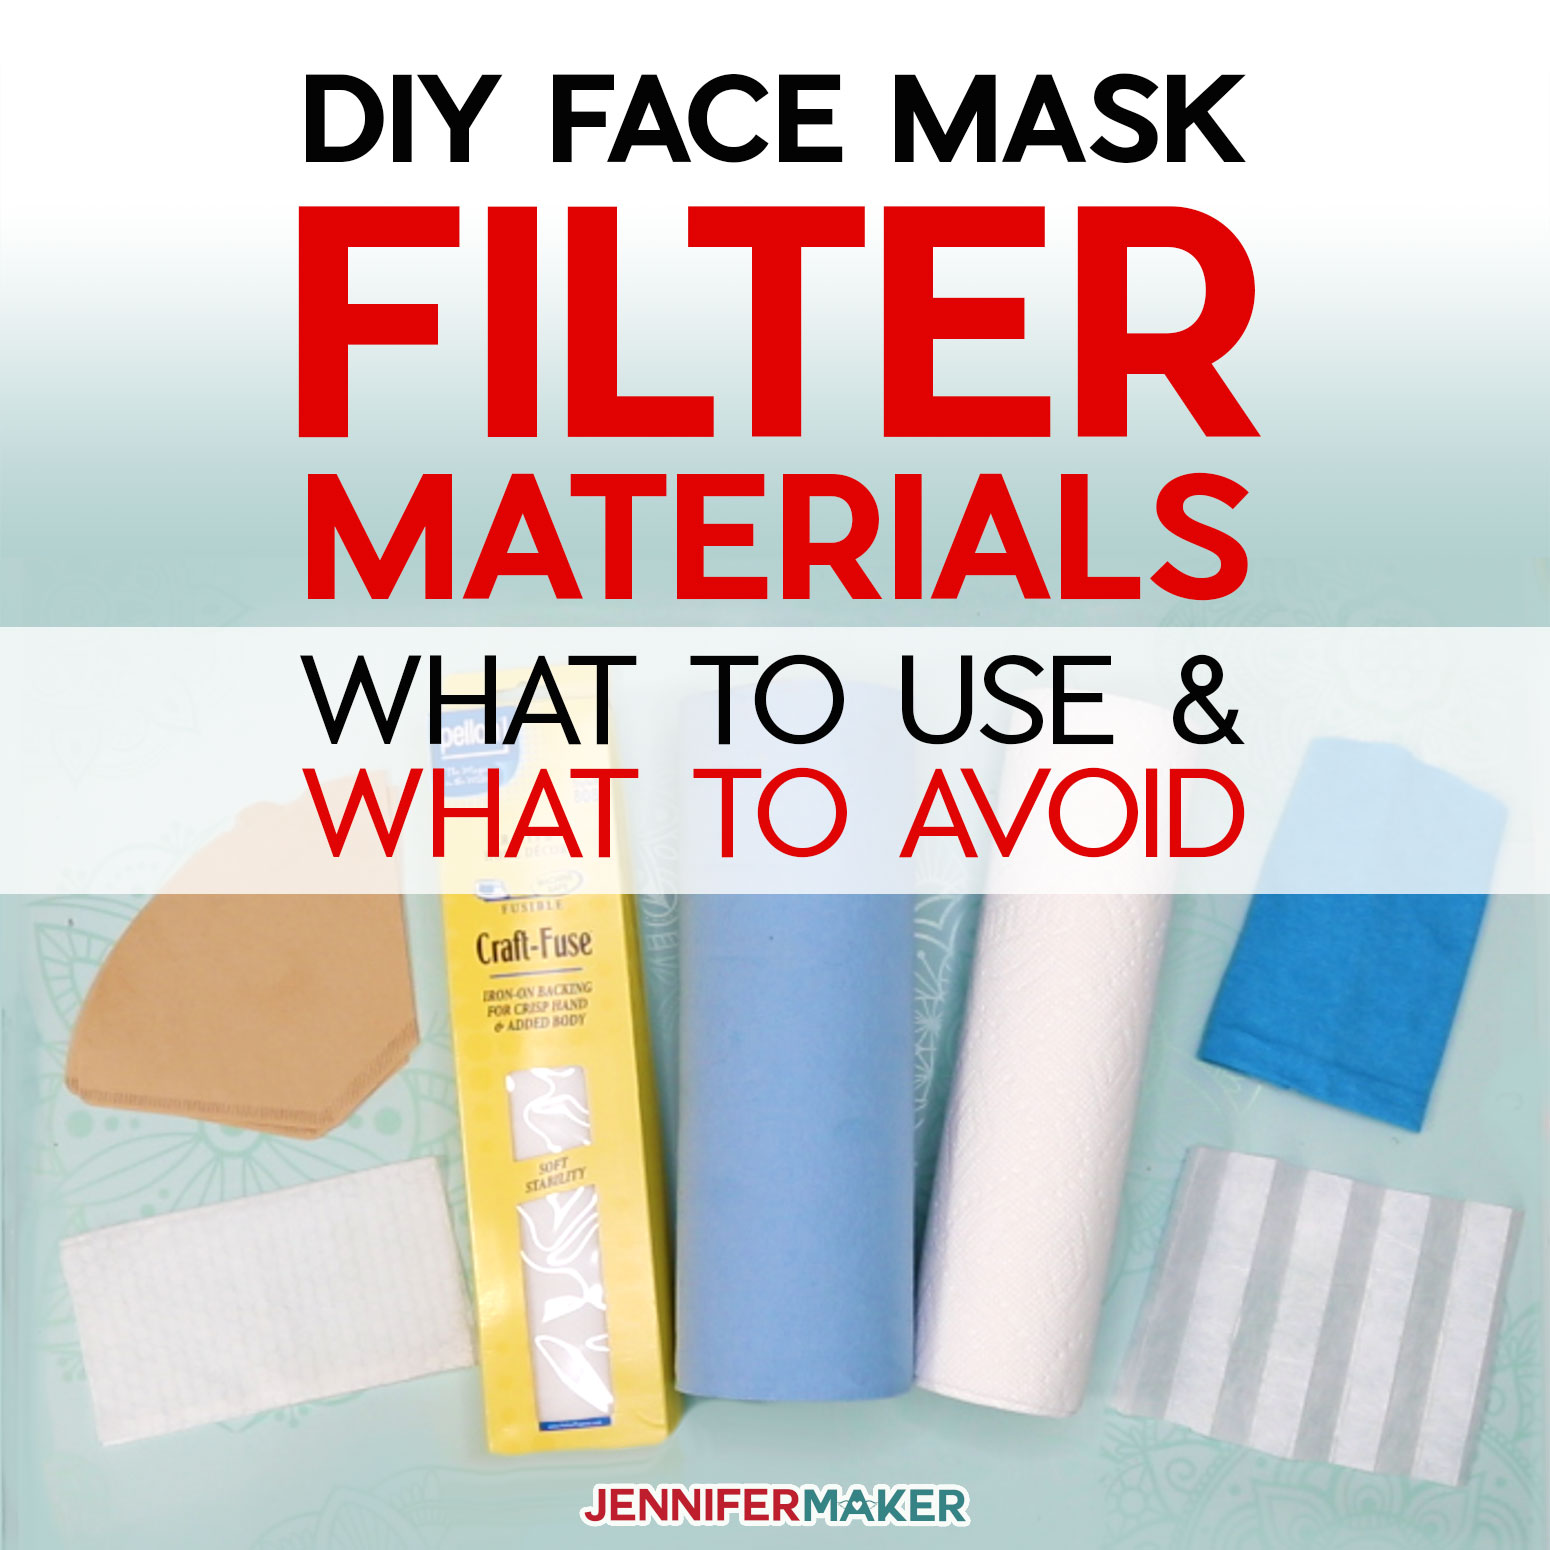 Face Mask Filter Materials Safety: What to Use, What to Avoid - Common Household Materials that may be used as a filter, along with research into effectiveness and breathability